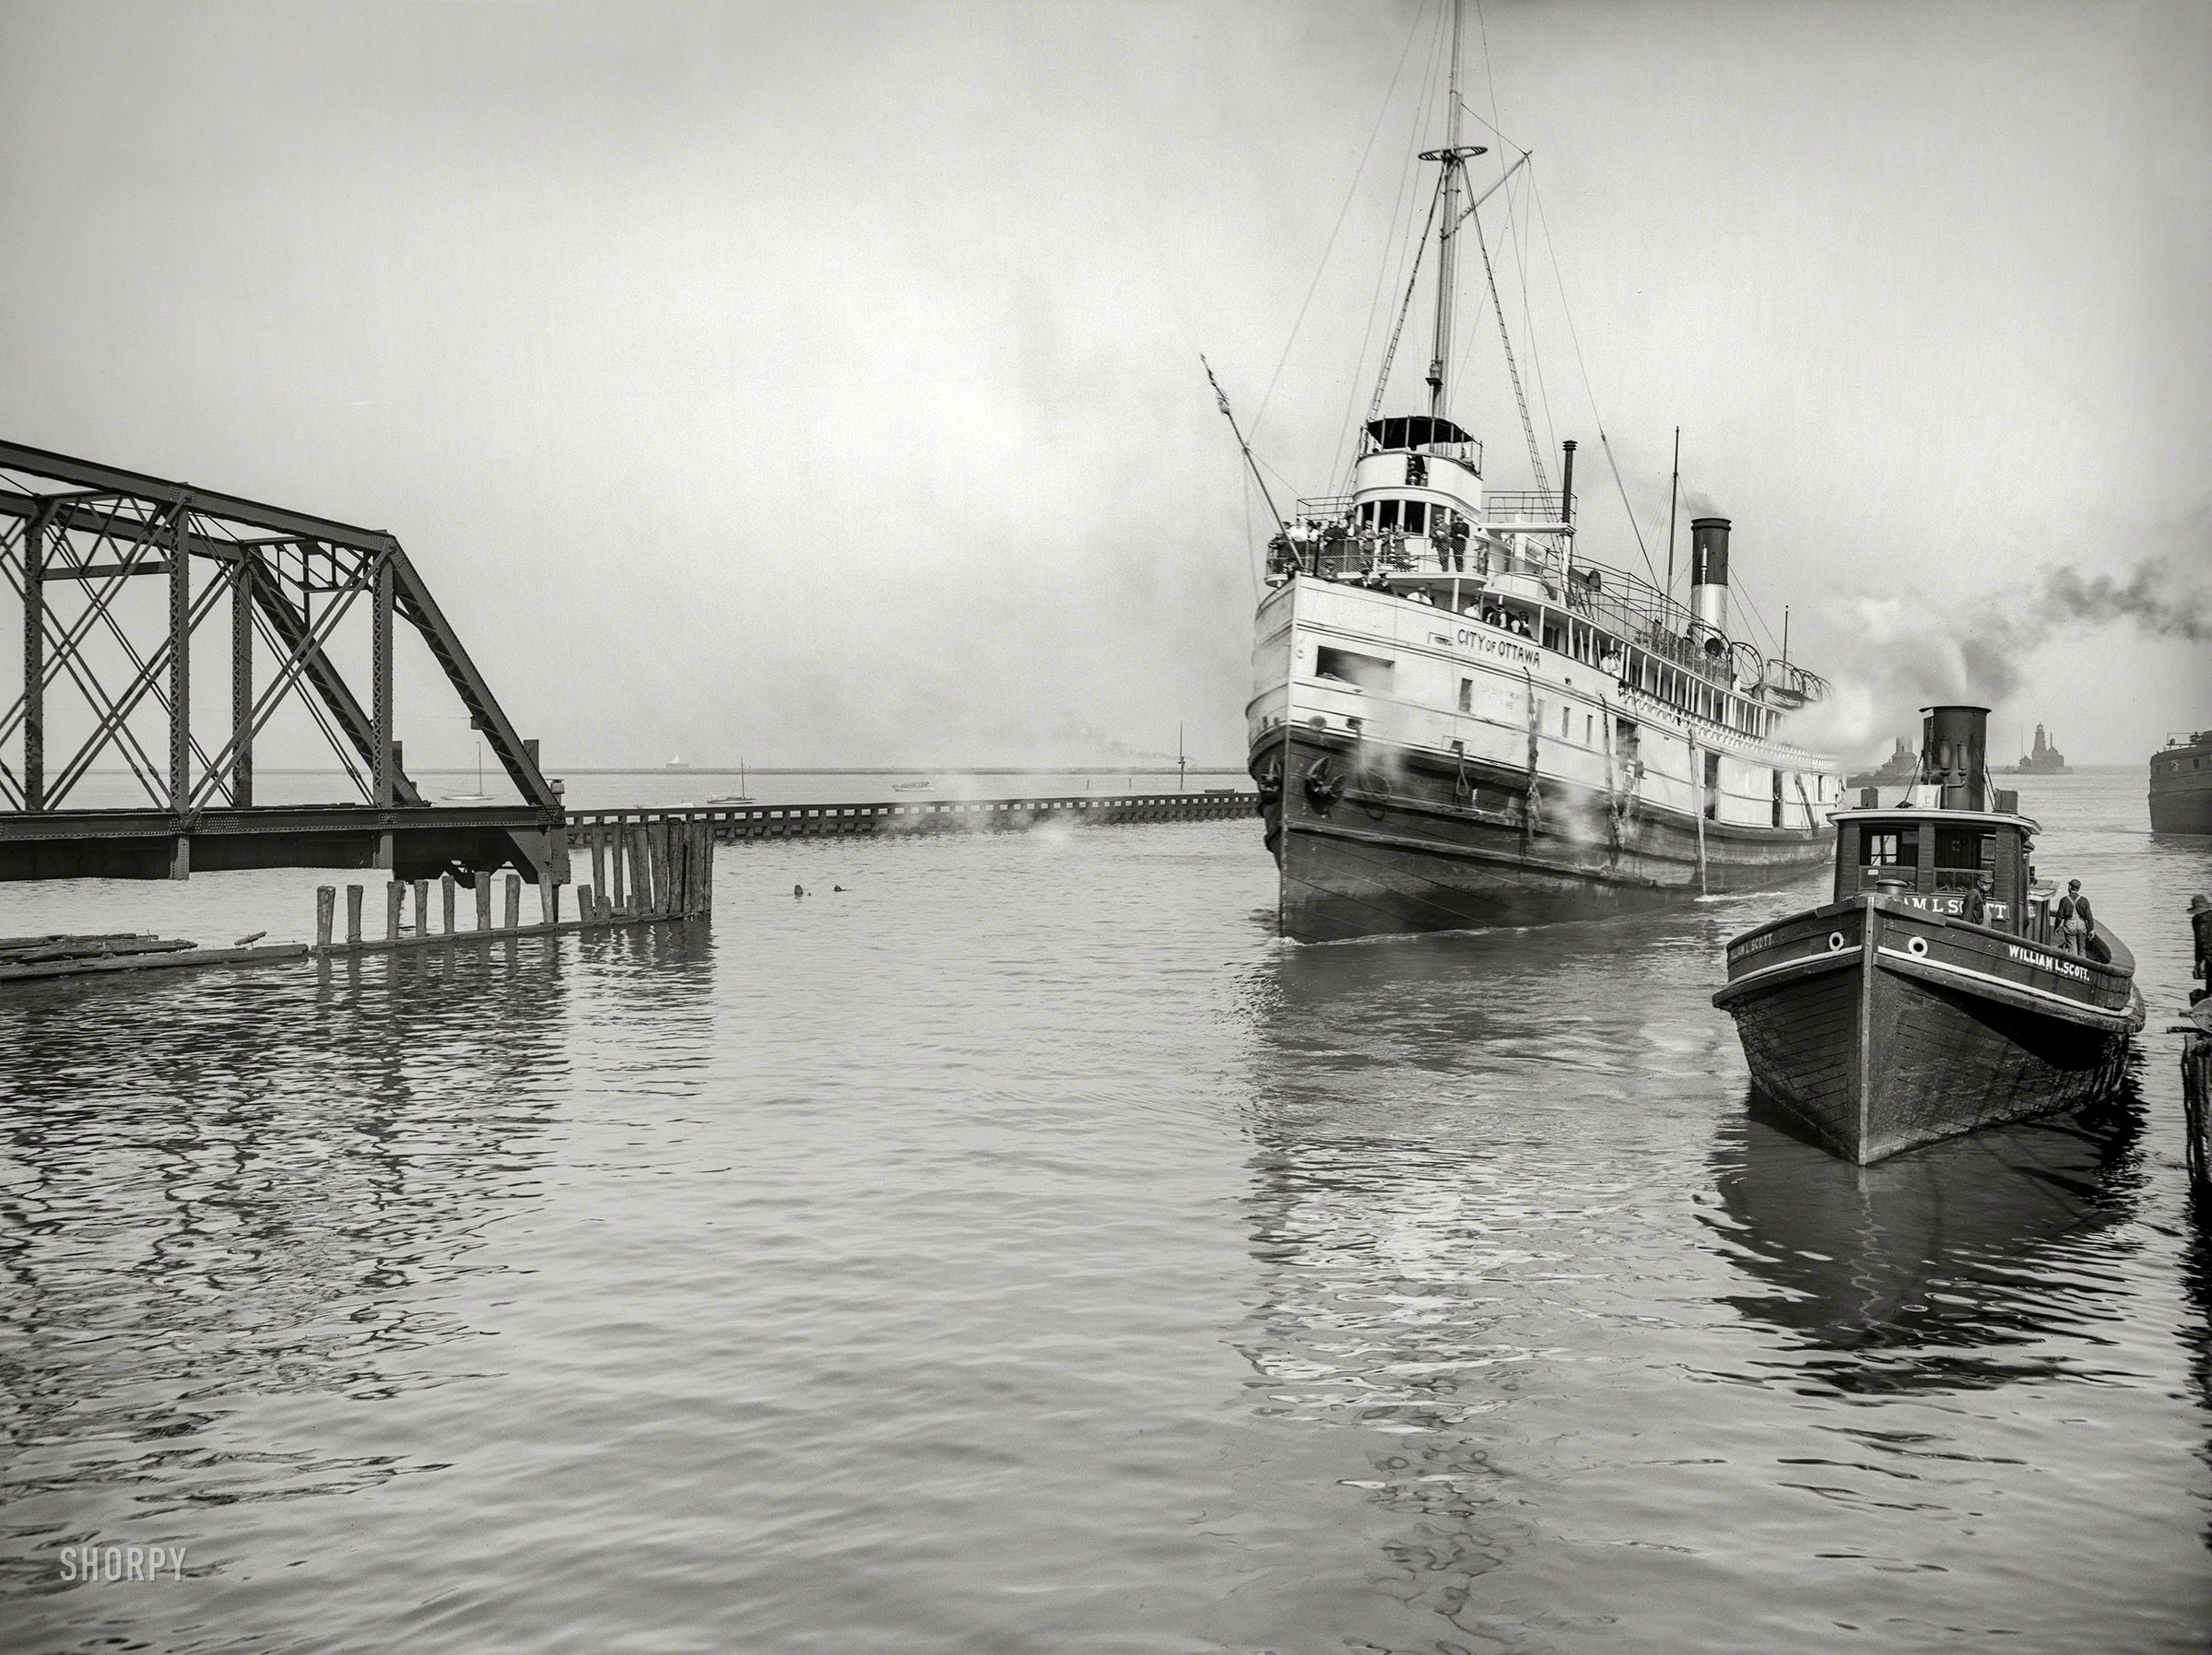 Cleveland circa 1907. "Steamer City of Ottawa entering Cuyahoga Creek." 8x10 inch dry plate glass negative, Detroit Publishing Company. View full size.